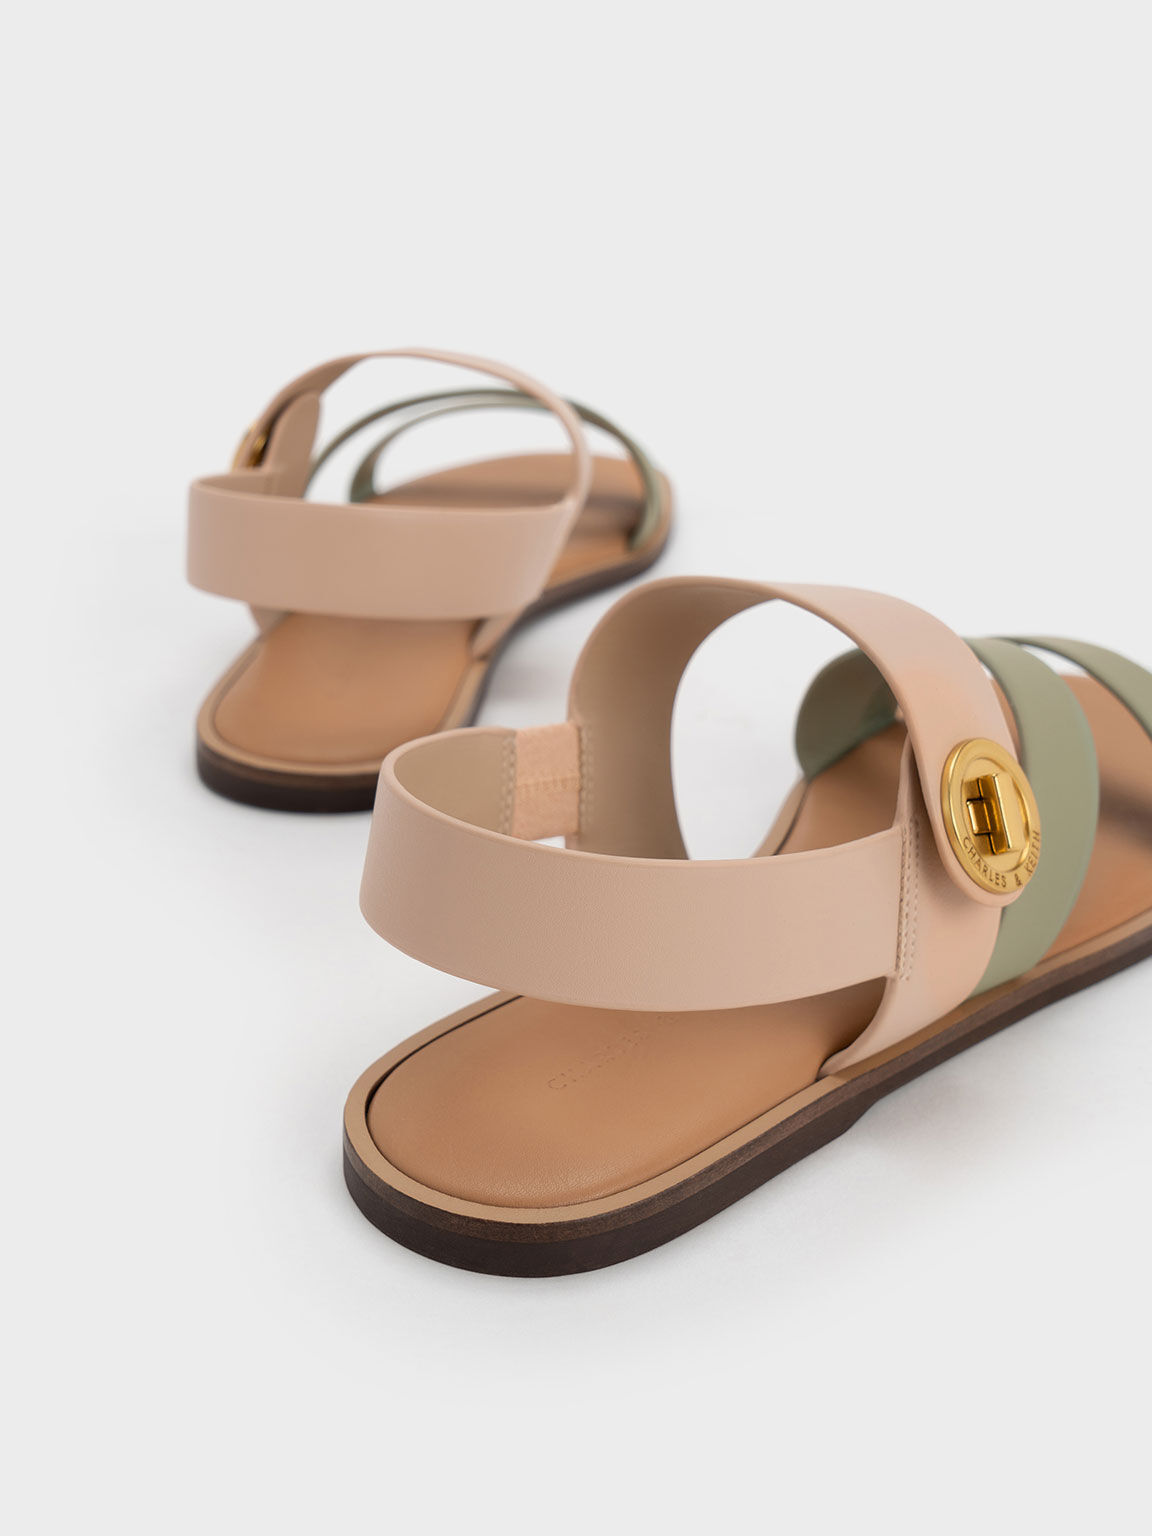 Two-Tone Asymmetric Strappy Sandals, Nude, hi-res